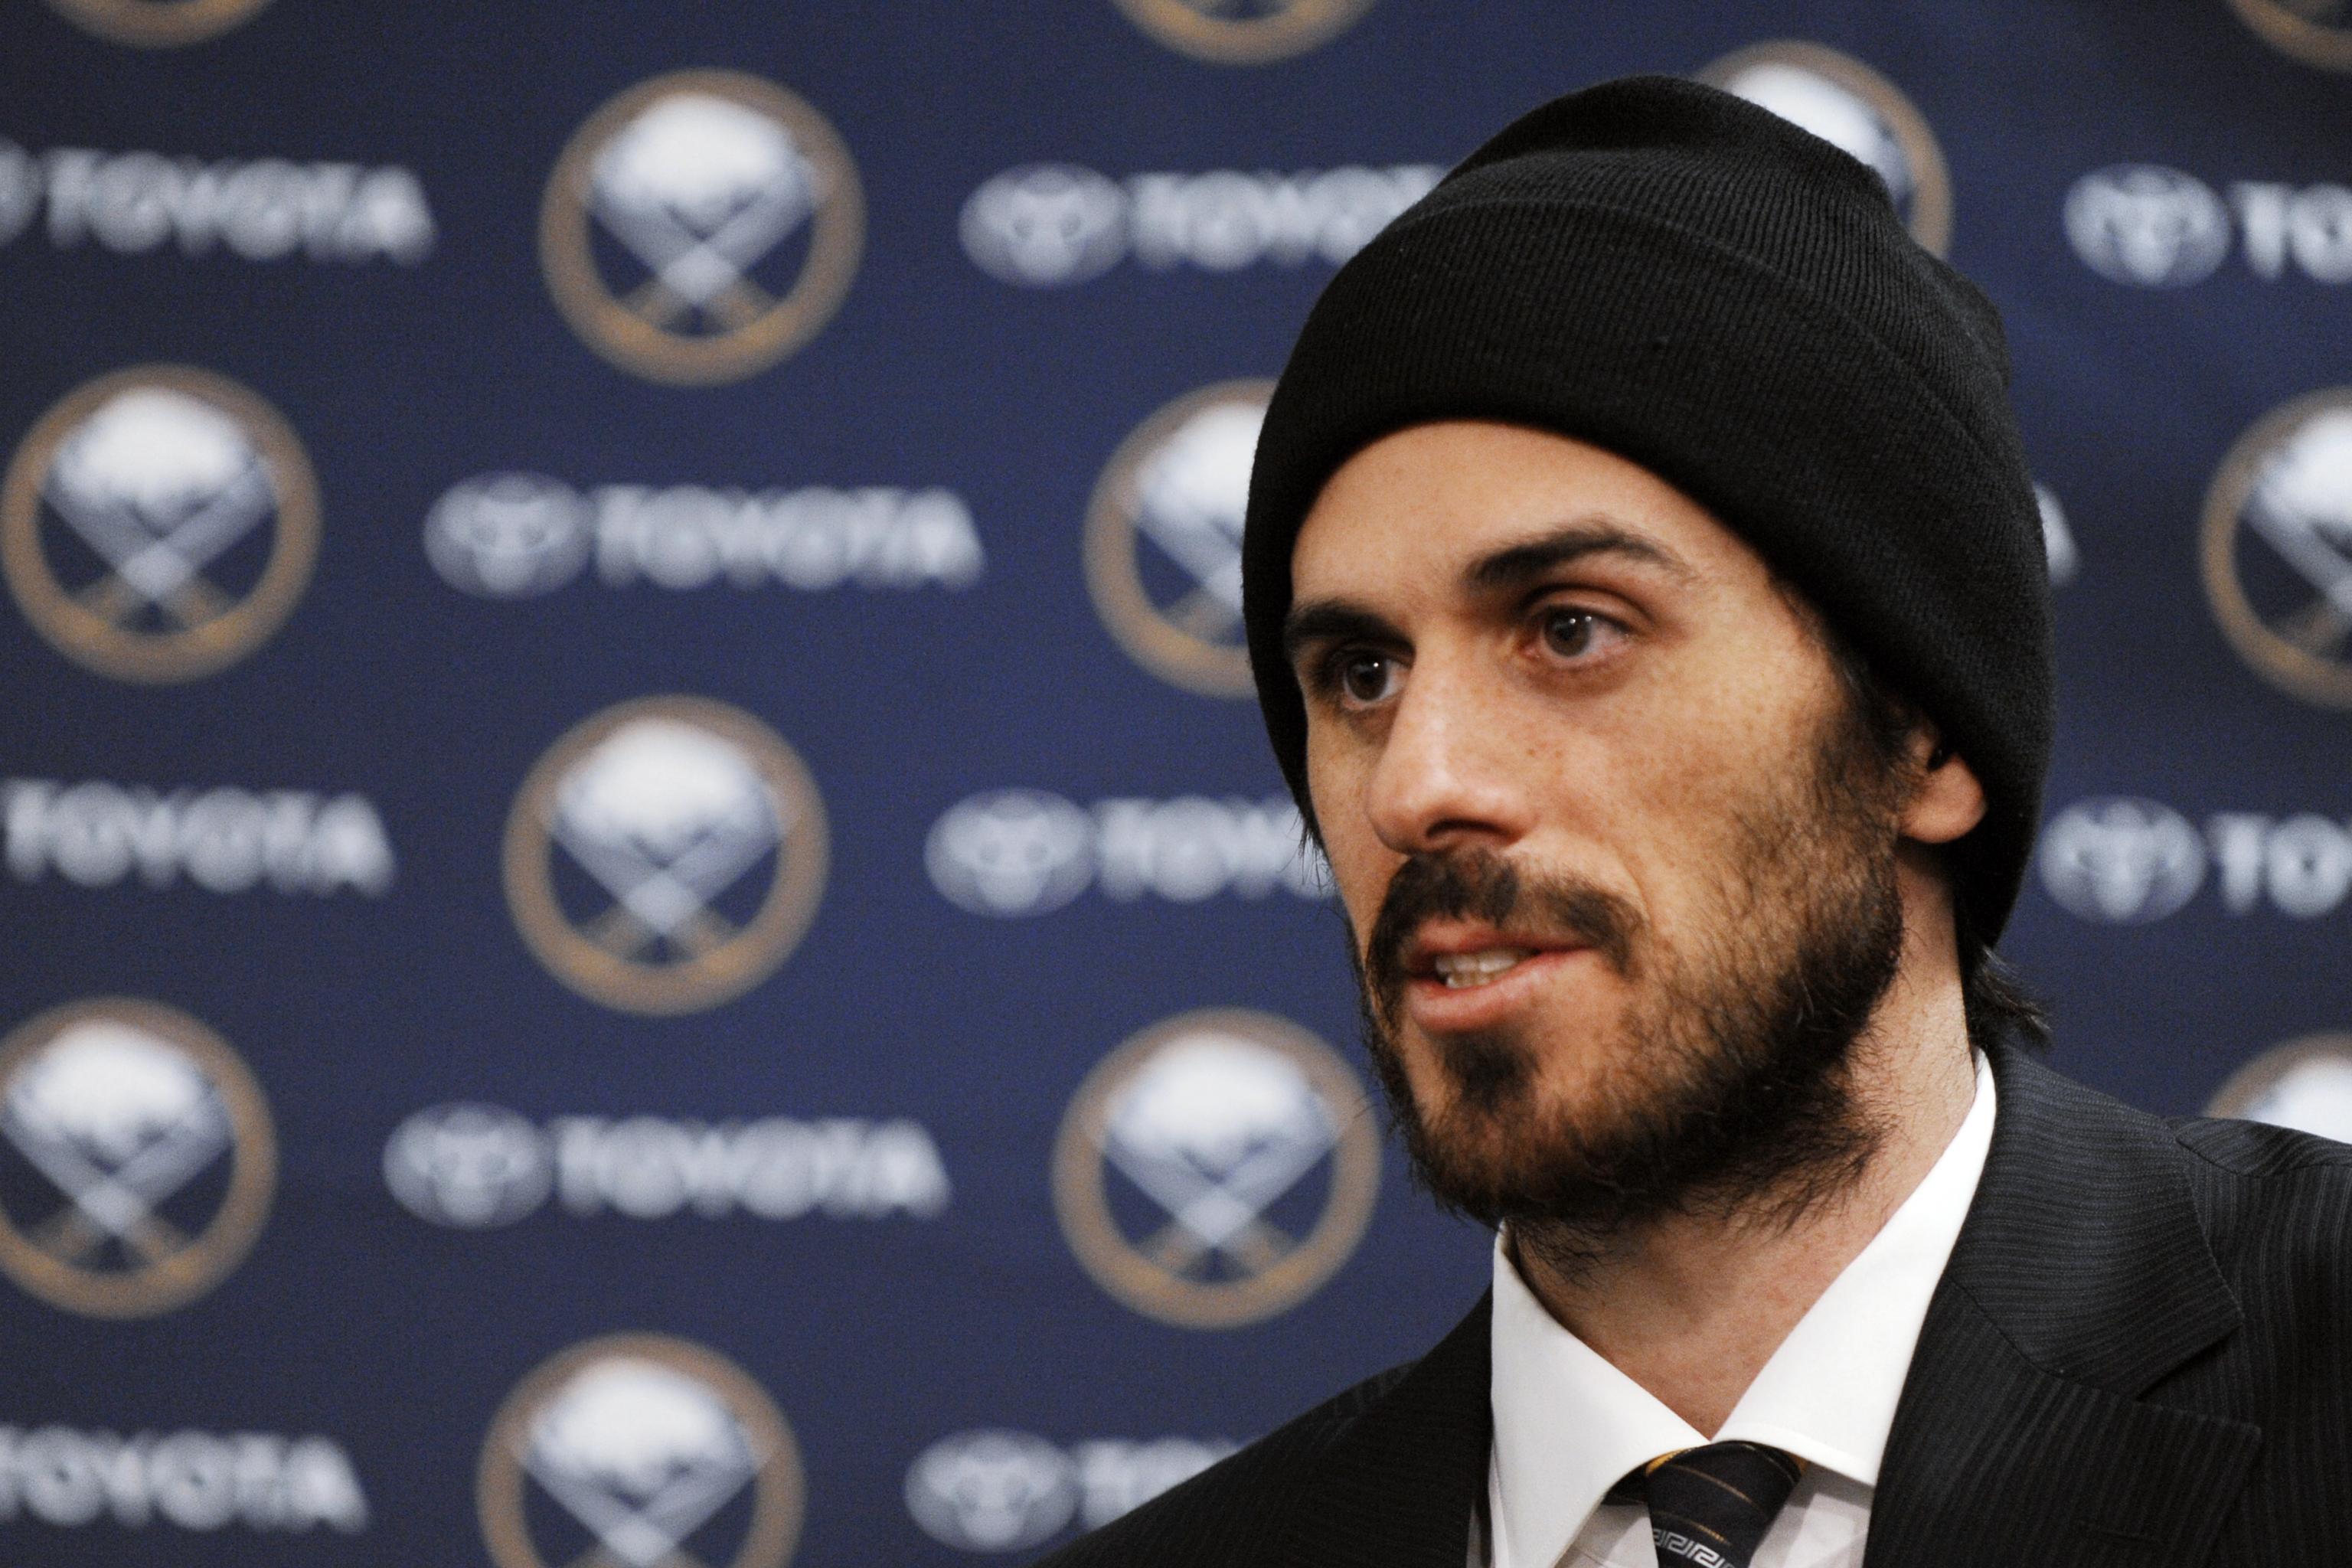 Revisiting the infamous Ryan Miller trade by the St. Louis Blues